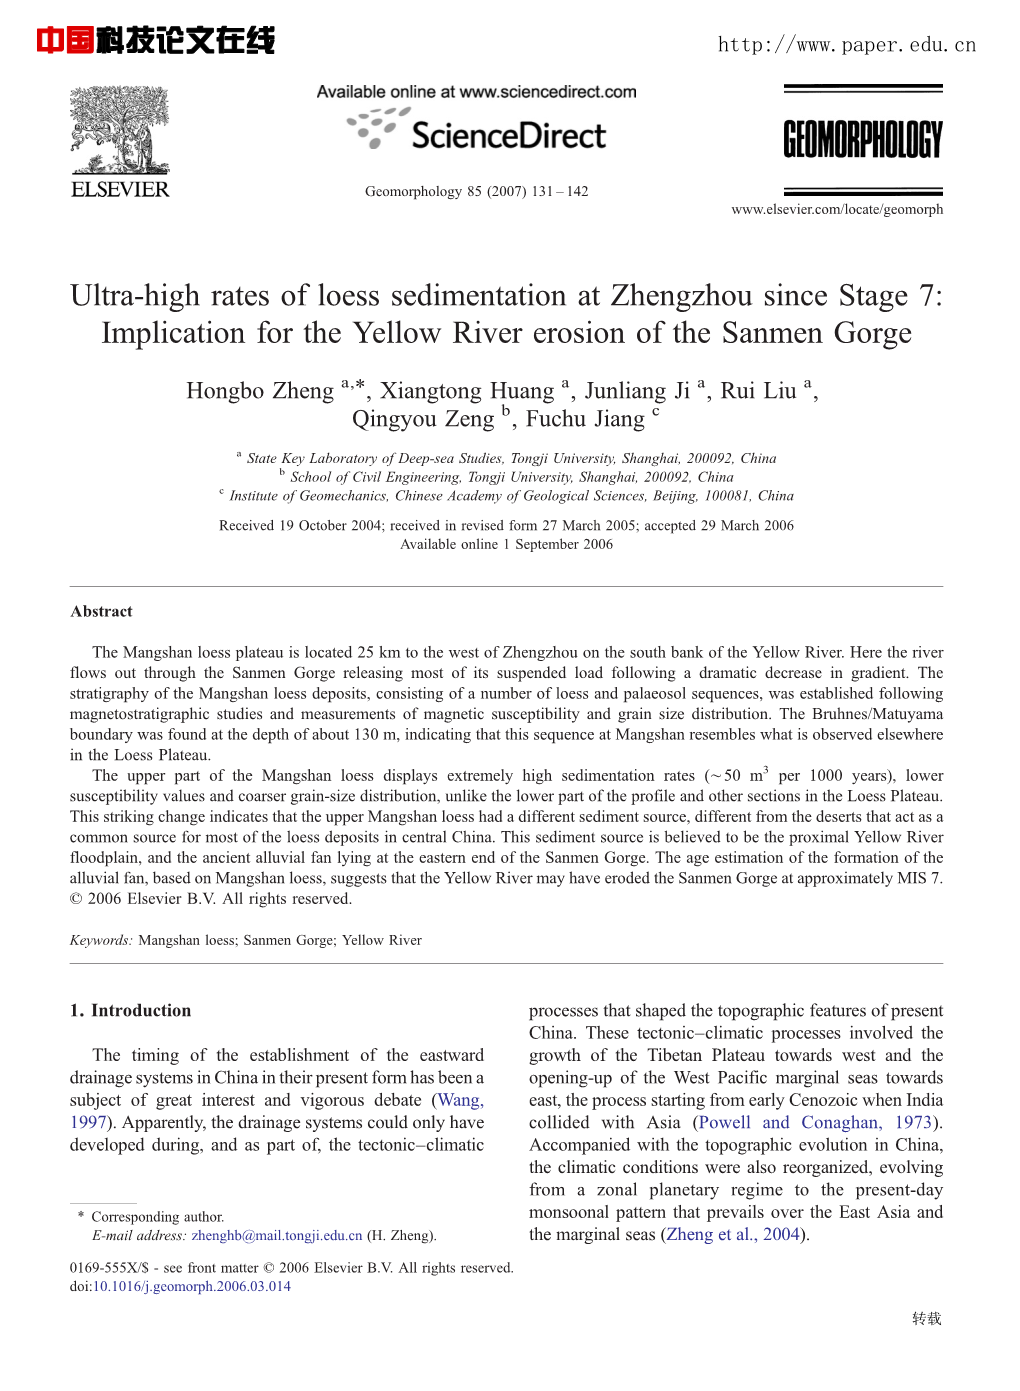 Ultra-High Rates of Loess Sedimentation at Zhengzhou Since Stage 7